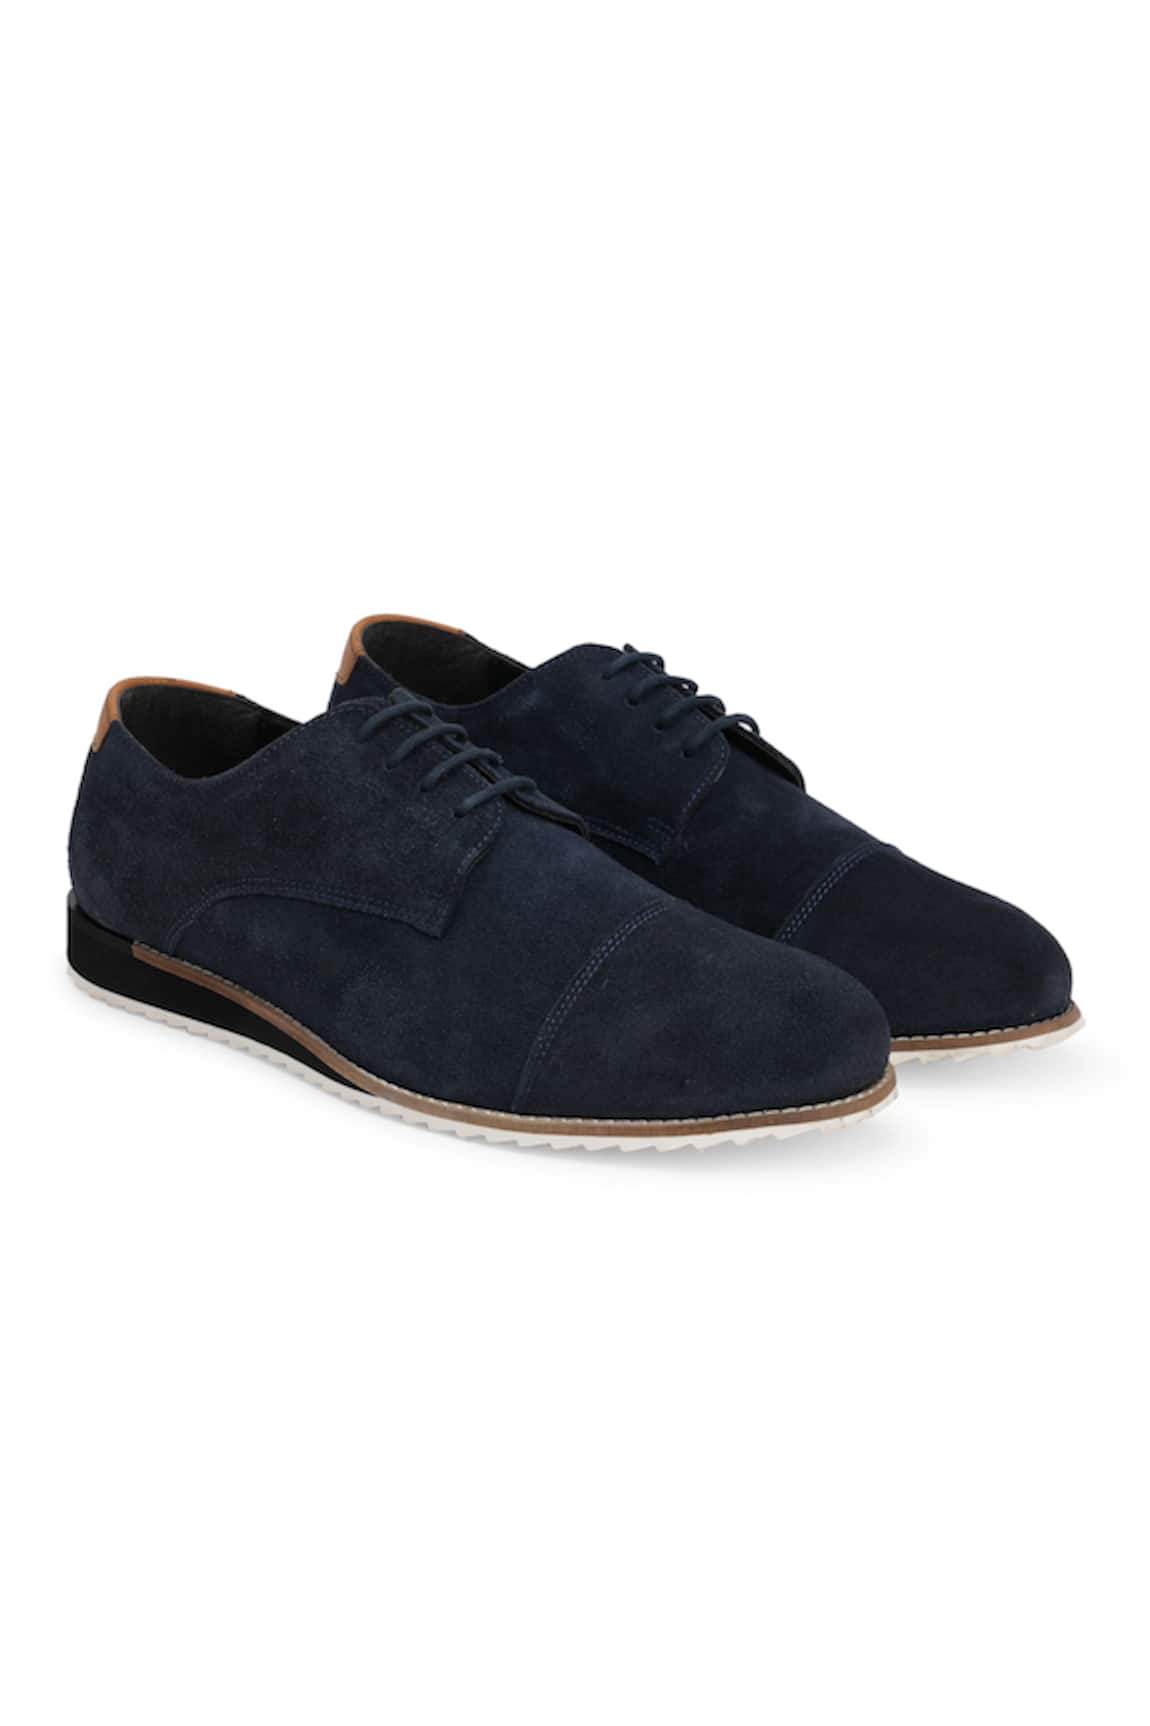 Hats Off Accessories Leather Casual Derby Shoes